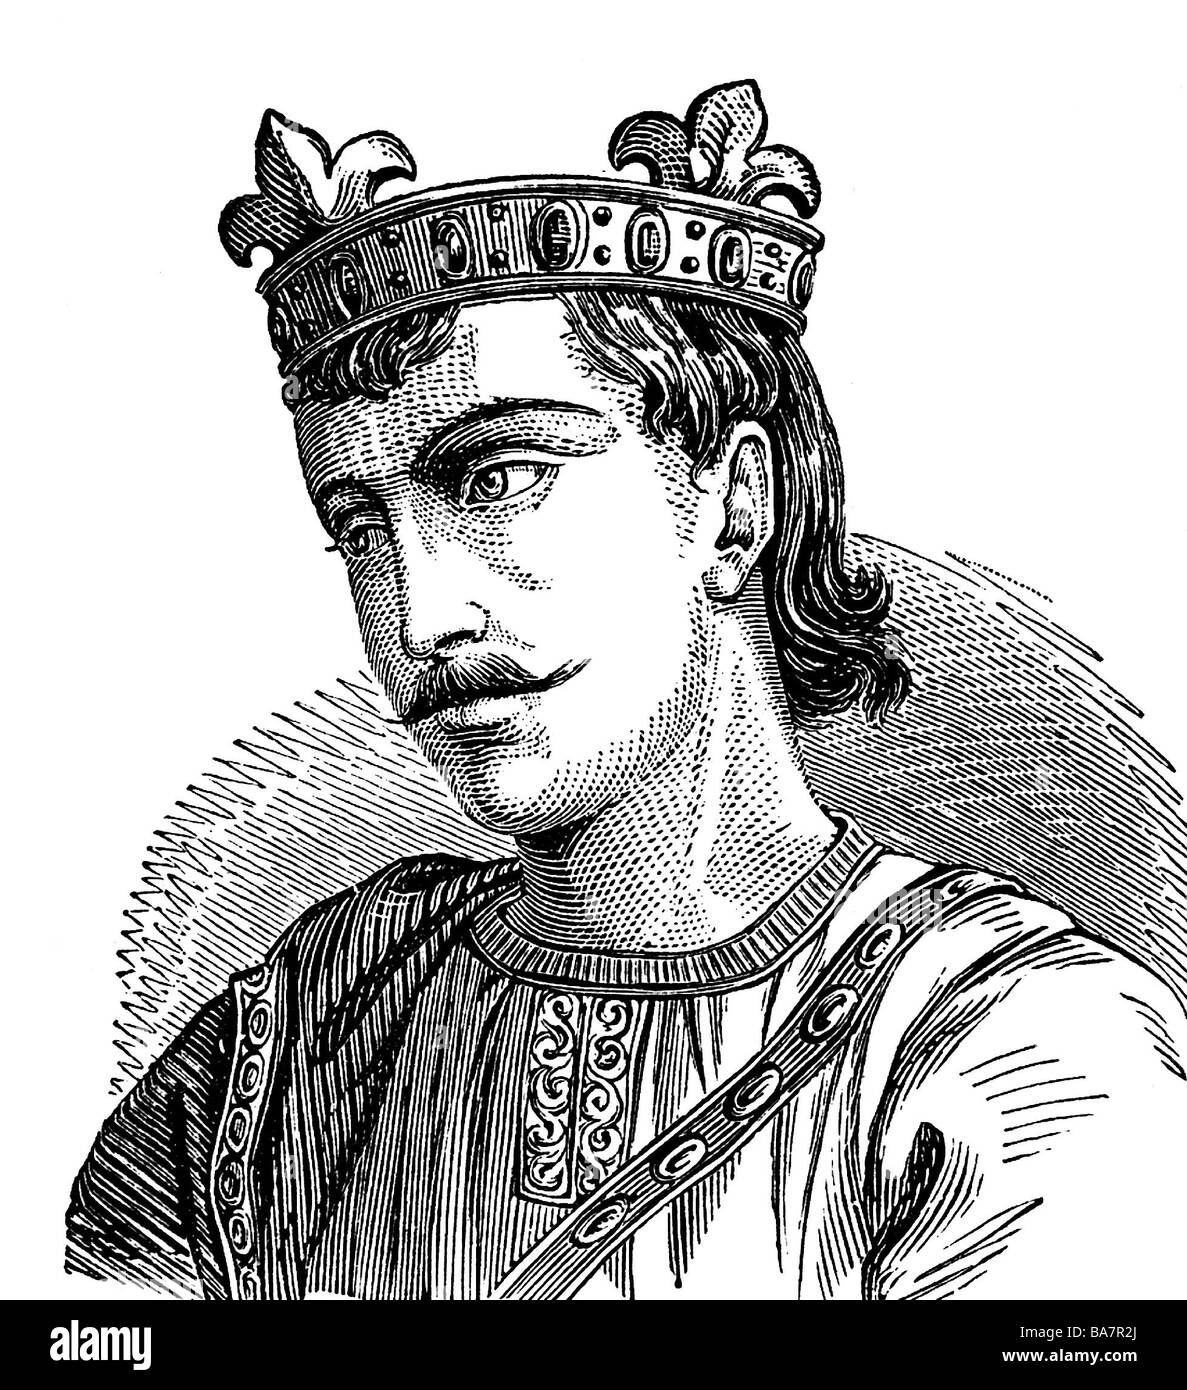 Ferdinand III, 1199 - 30.5.1252, King of Castile, portrait, wood engraving, 19th century, after contemporaneous image, Stock Photo